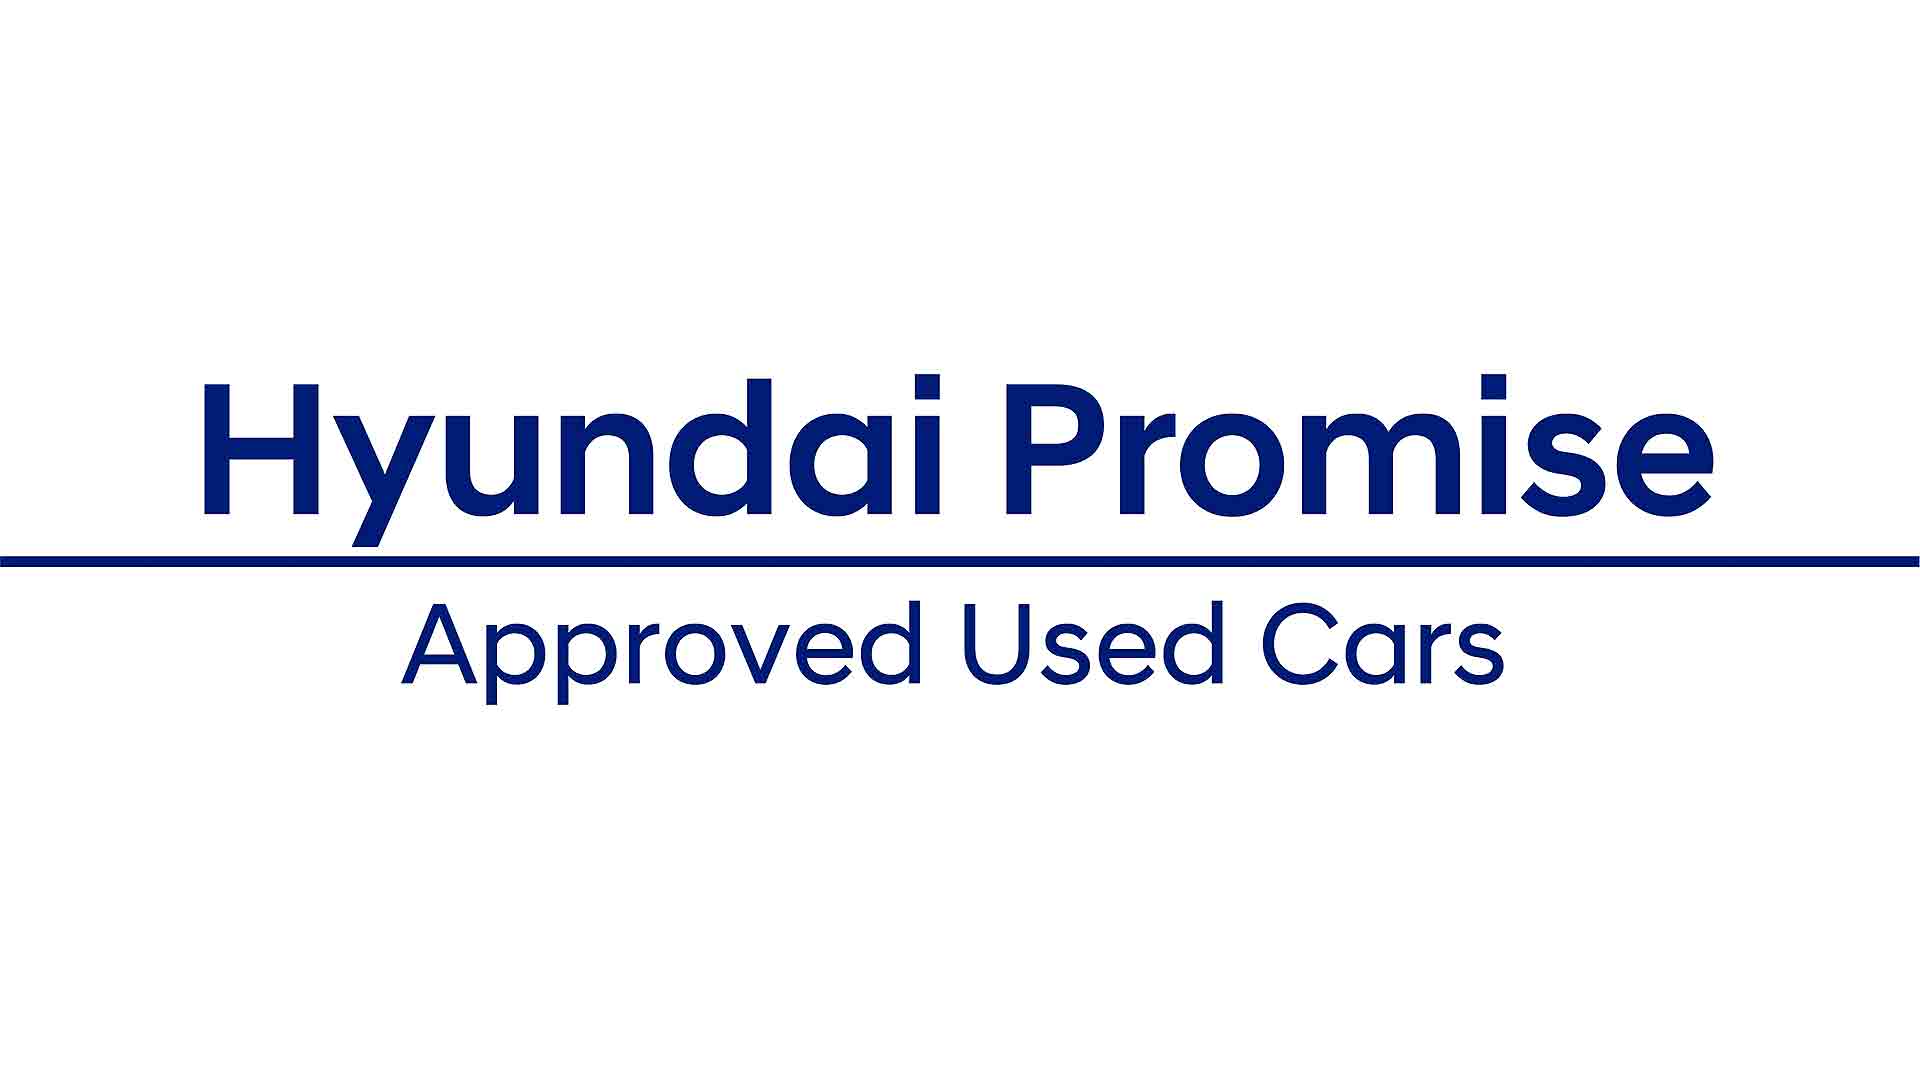 Hyundai PROMISE approved used cars